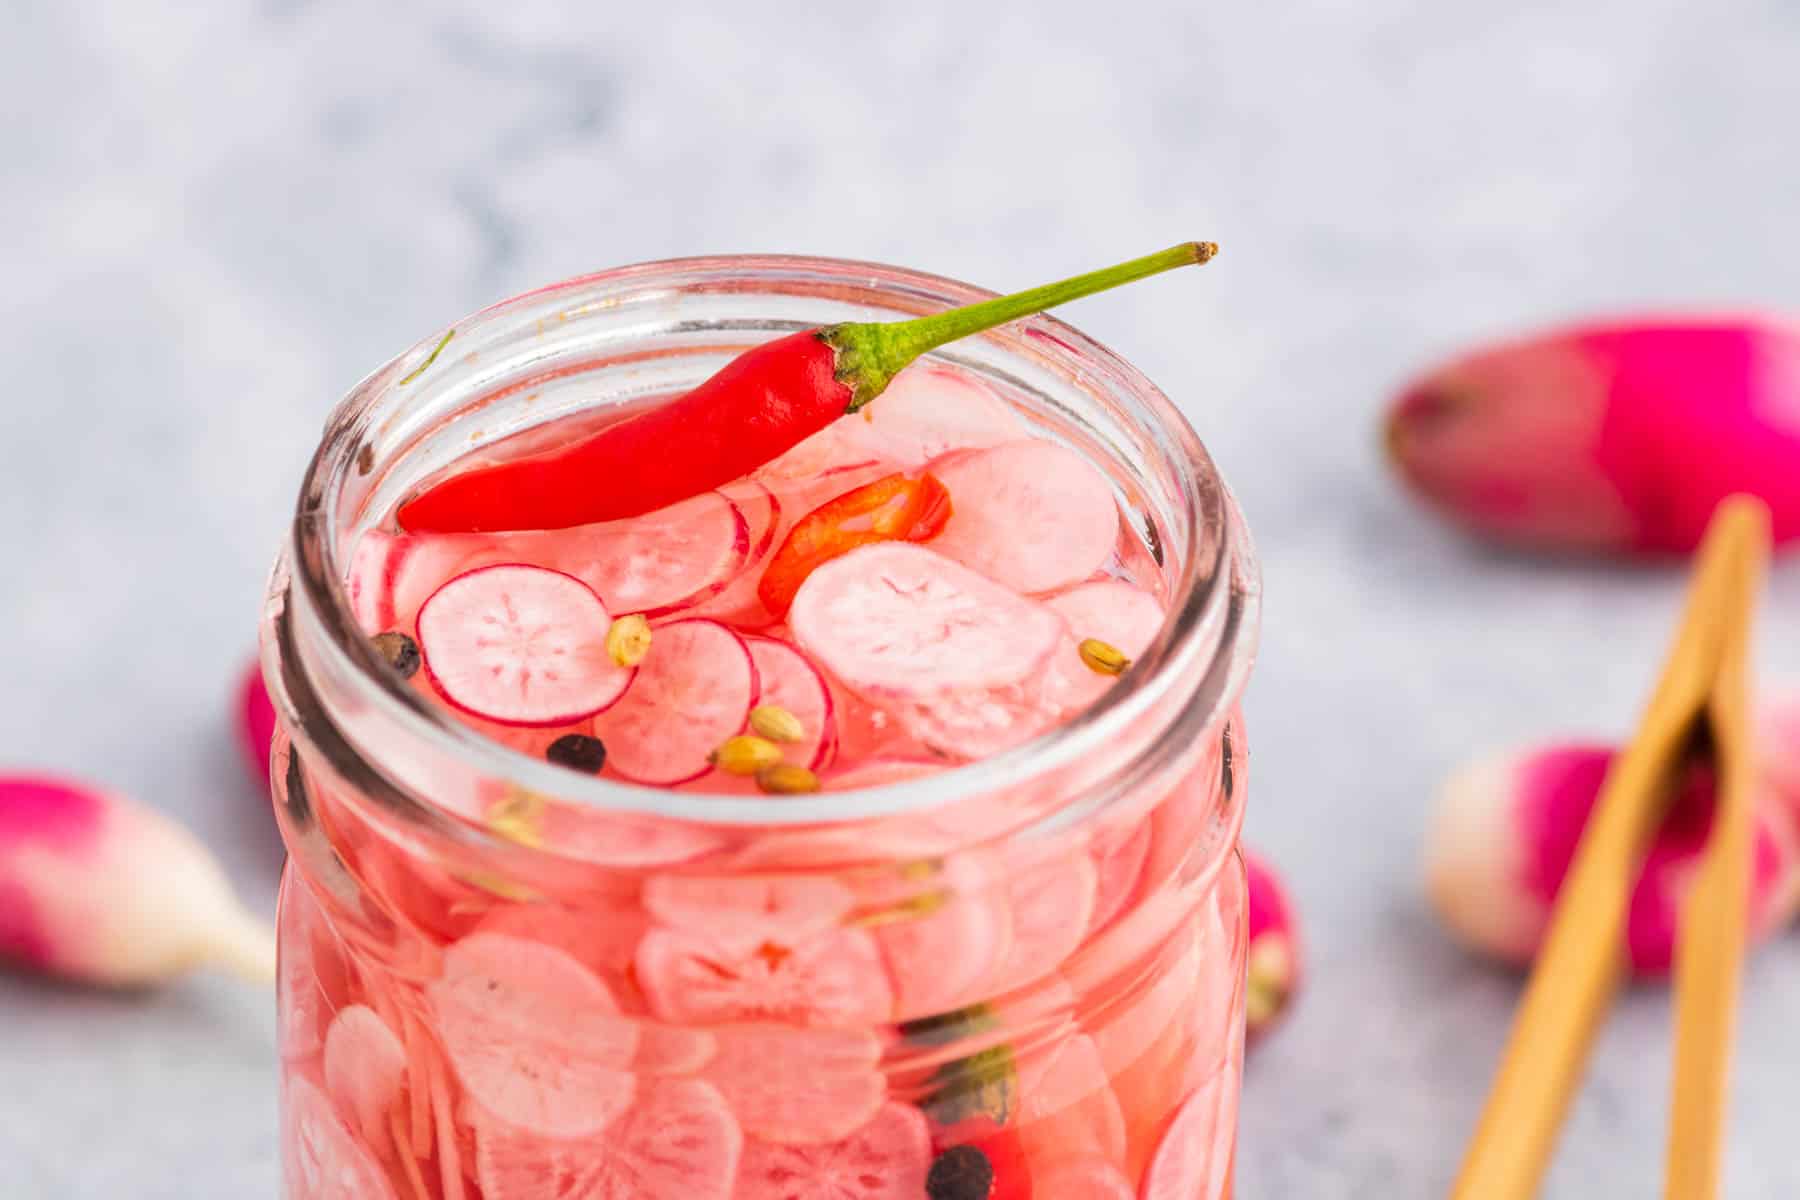 The top of an open glass jar filled with sliced radishes, red chili pepper, peppercorns, and coriander seeds.